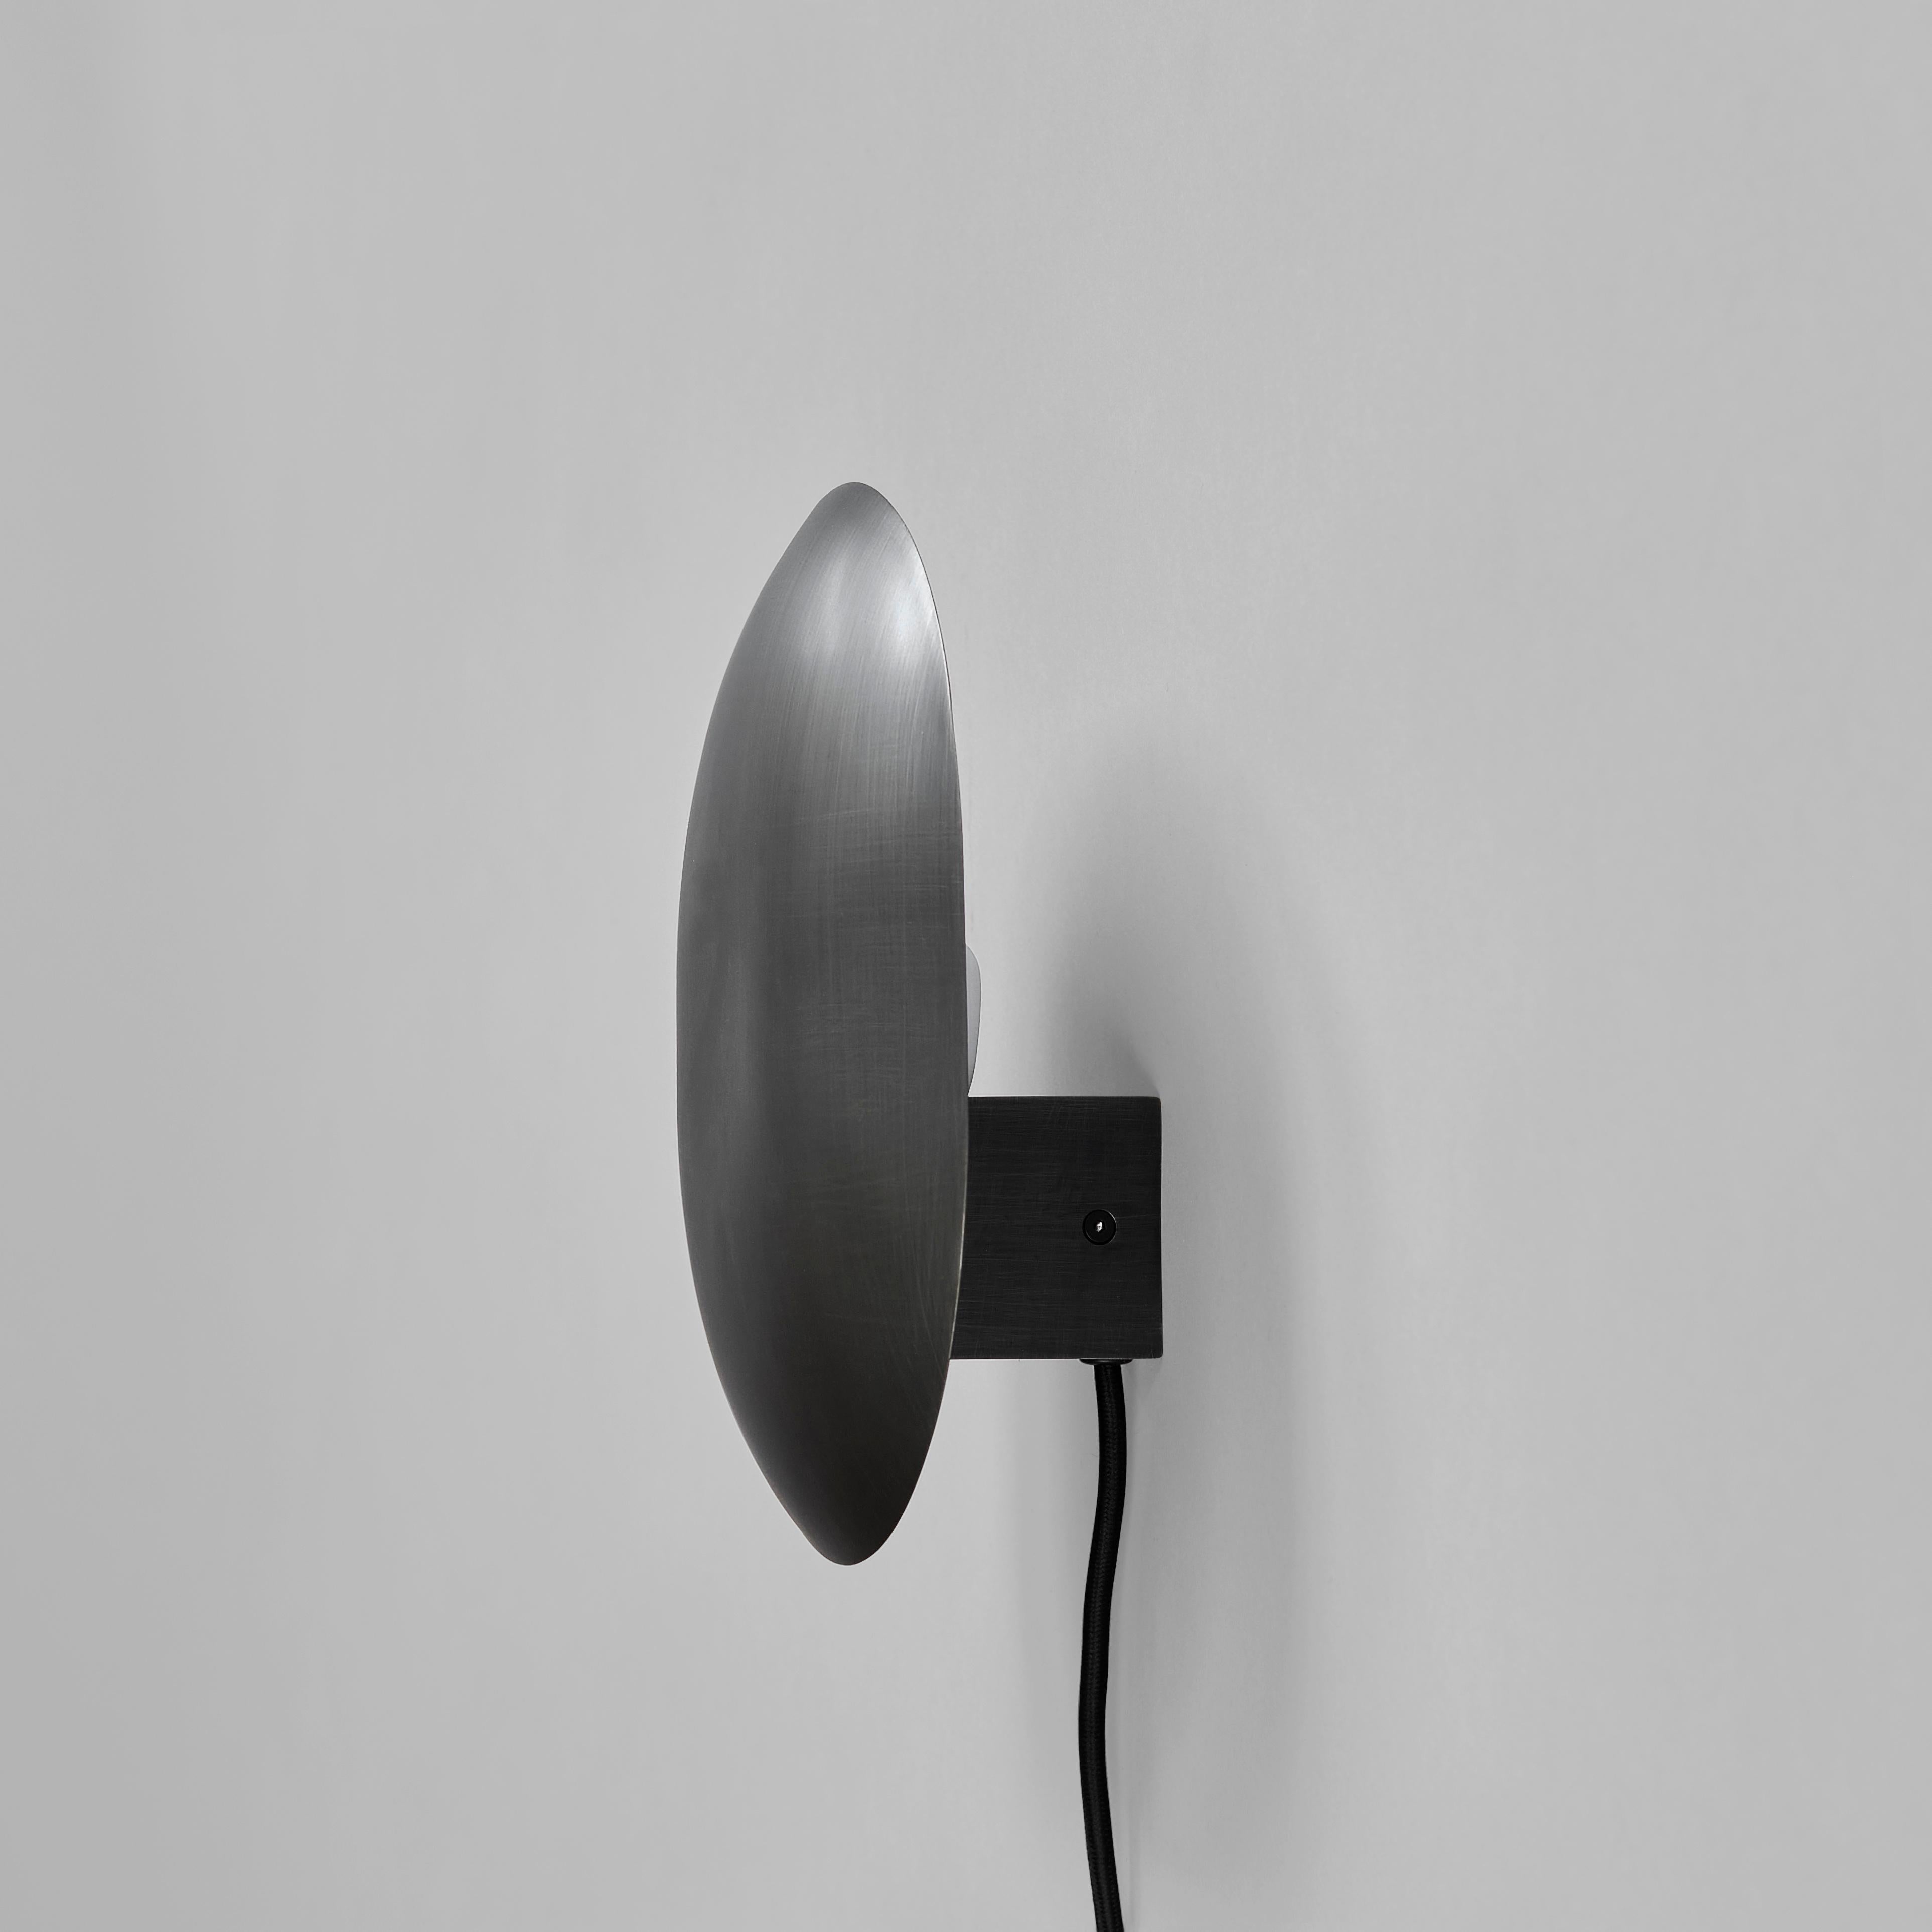 Bronze clam wall lamp by 101 Copenhagen
Designed by Kristian Sofus Hansen & Tommy Hyldahl
Dimensions: L 14 x W 22 x H 26 cm
Cable length: 170 cm

Materials: metal: plated metal / bronze
Cable: fabric covered cable / black

Characterized by